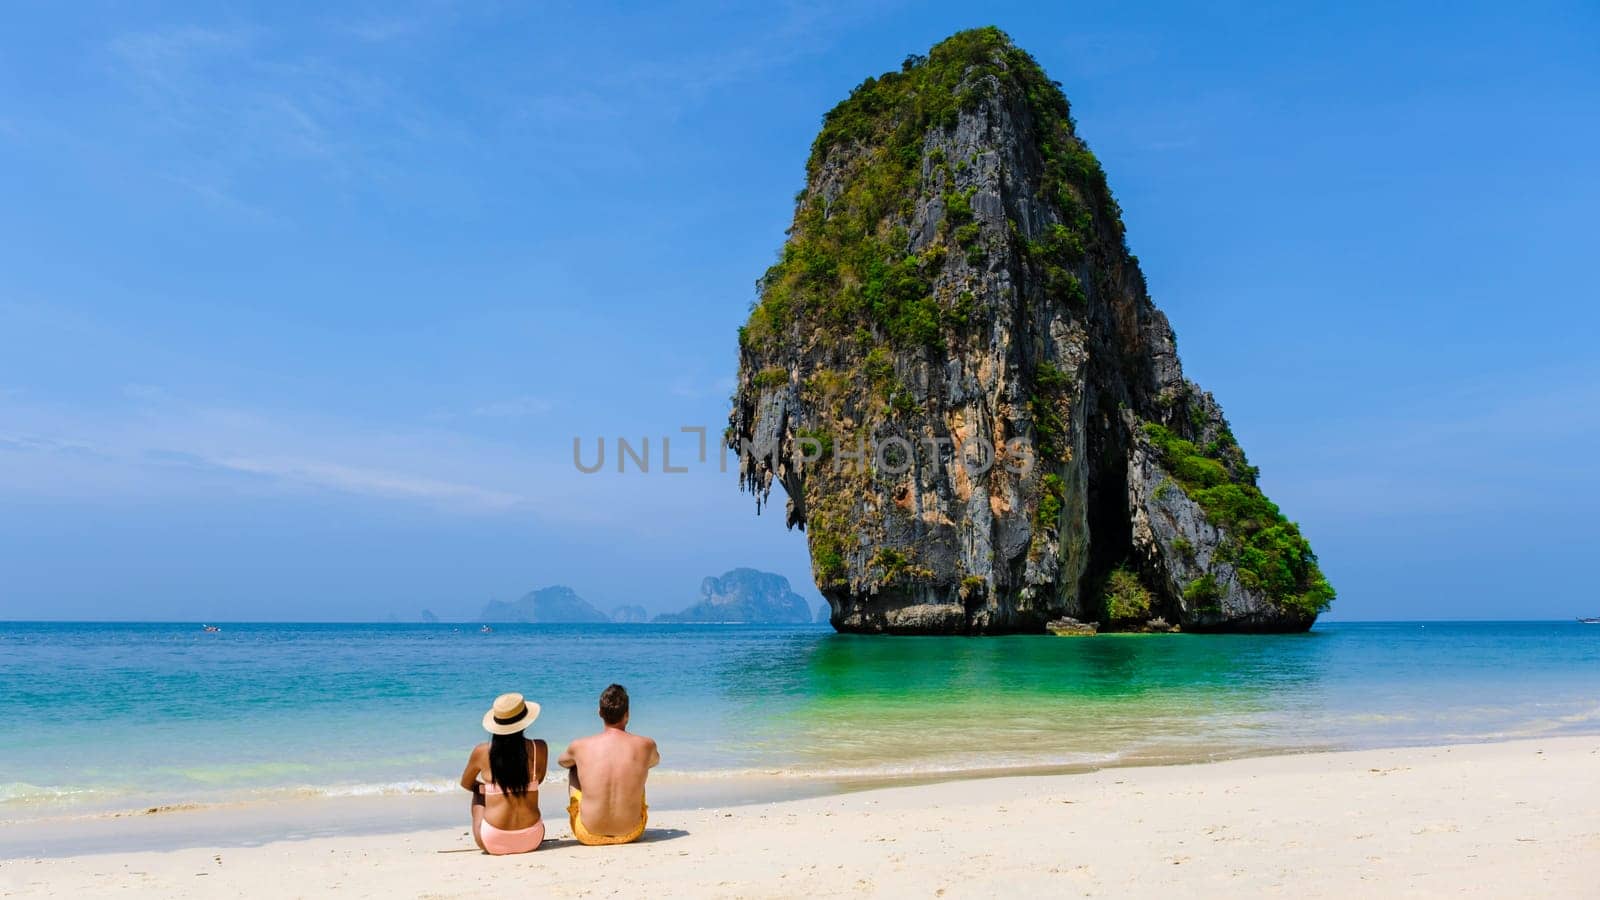 couple of men and woman relaxing on the beach during vacation in Thailand Railay Beach Krabi by fokkebok